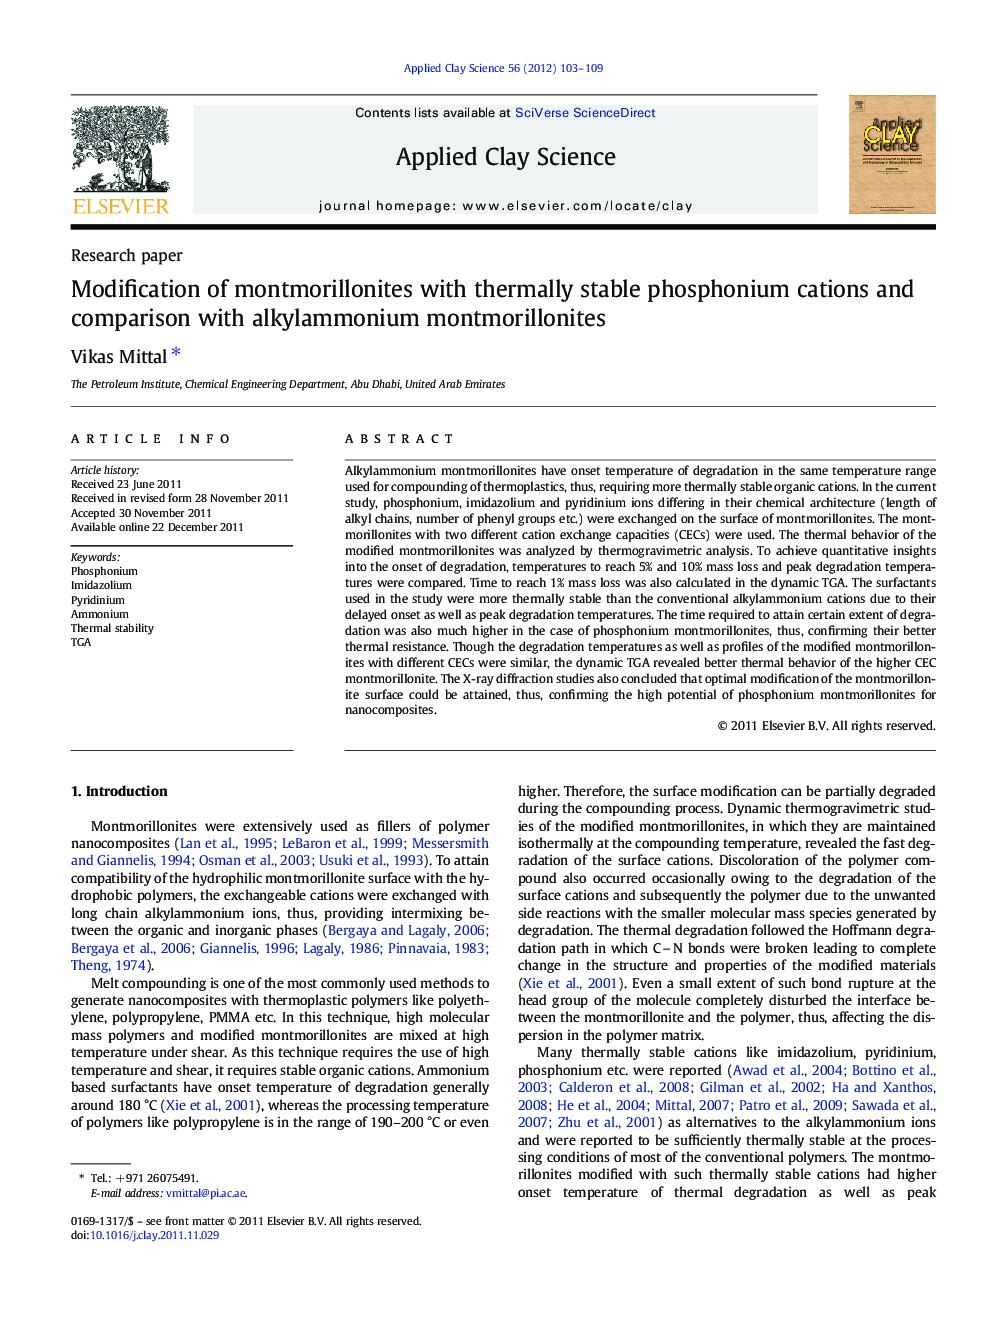 Modification of montmorillonites with thermally stable phosphonium cations and comparison with alkylammonium montmorillonites